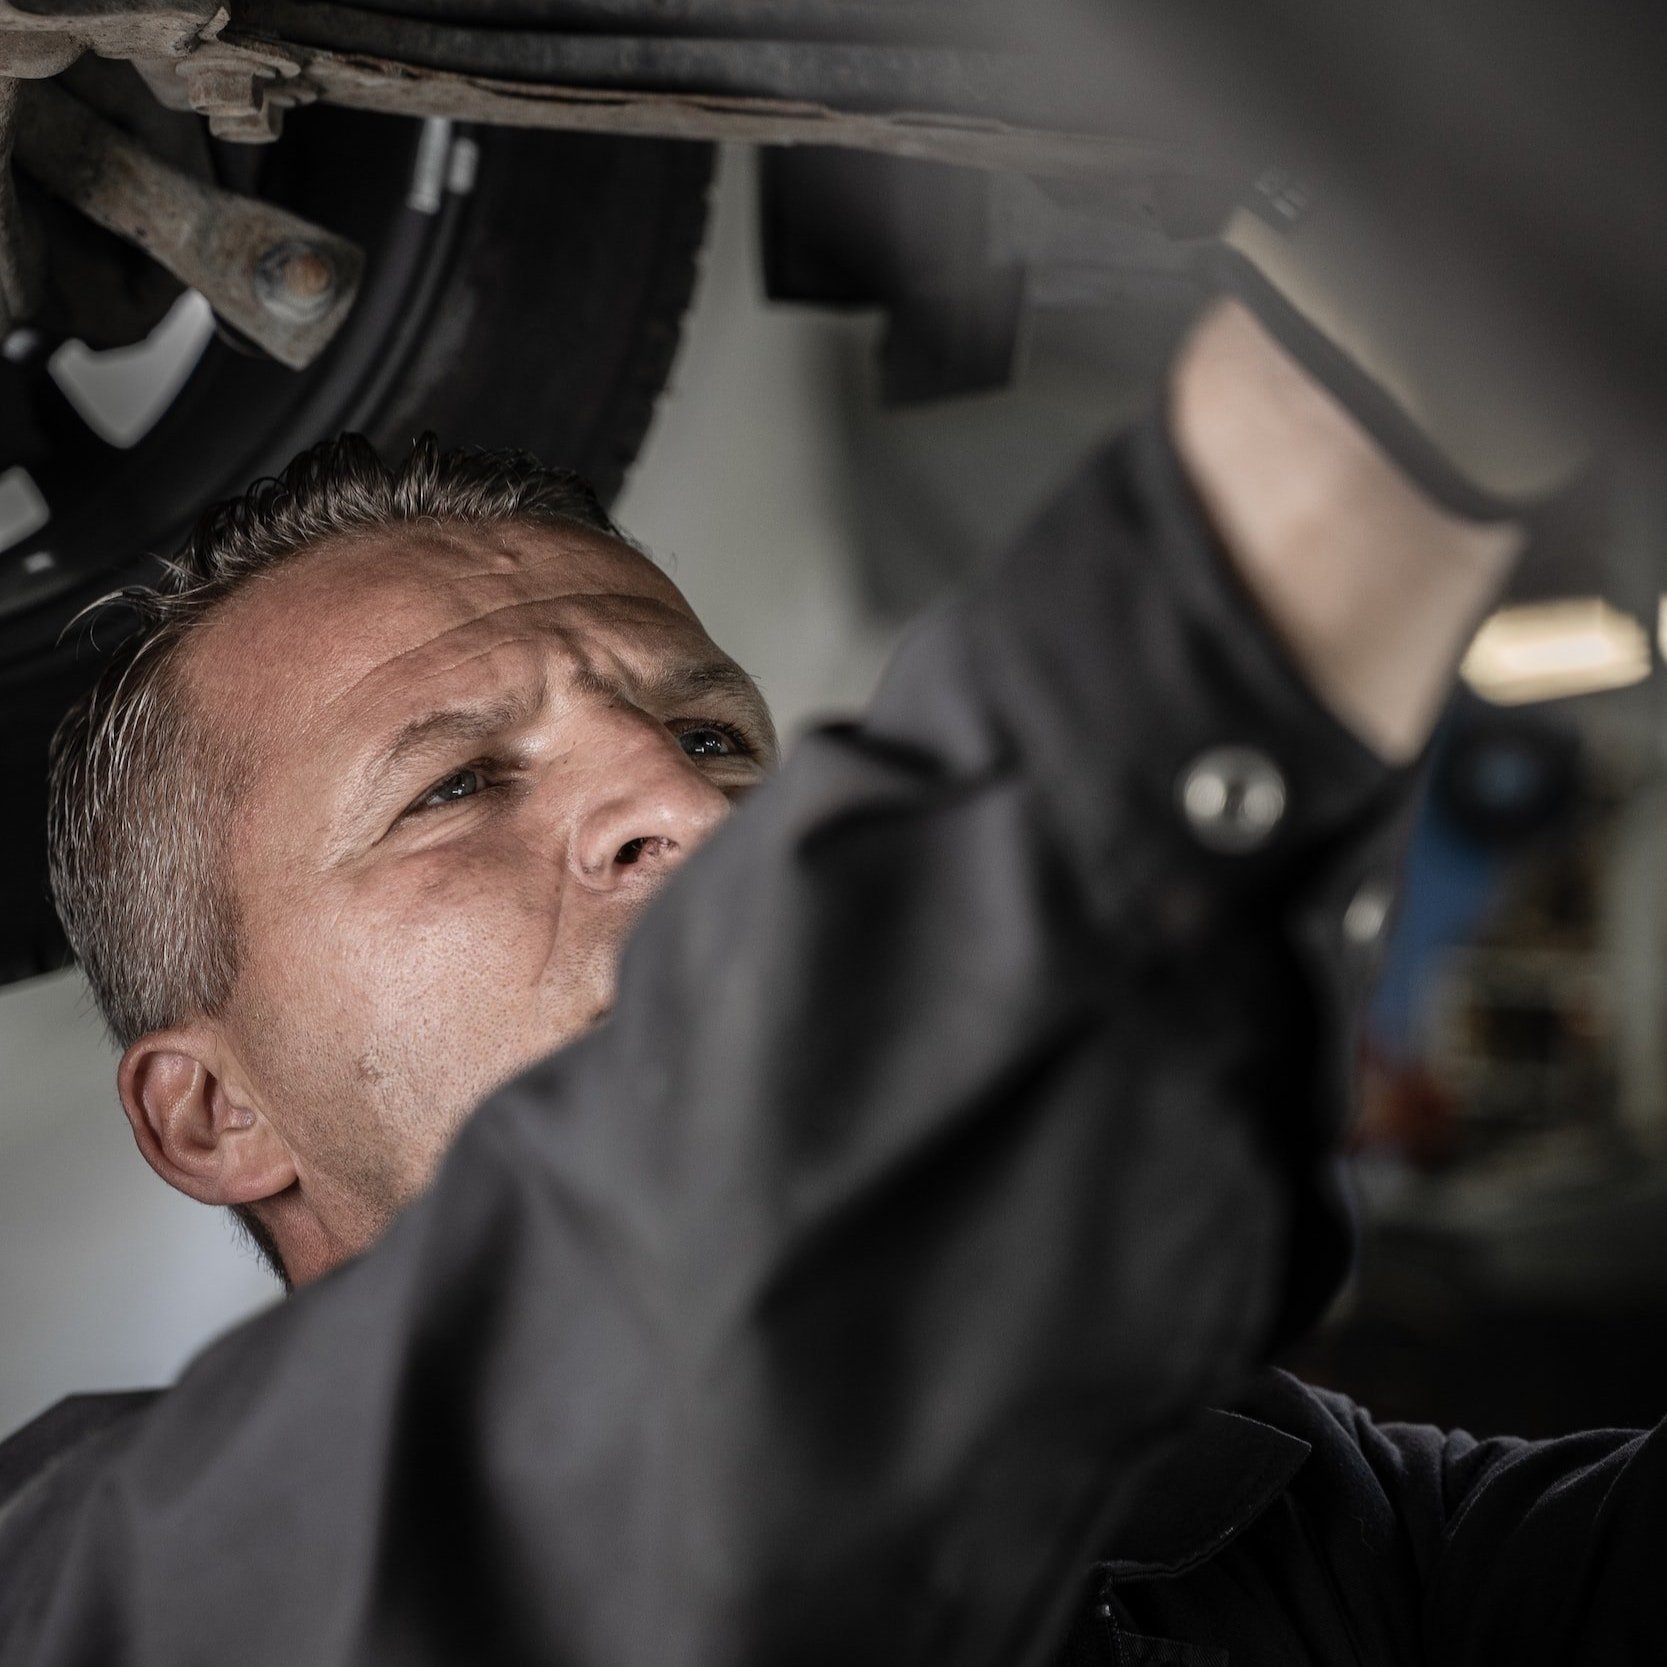 Interested in Becoming a Registered Emissions Repair Tech?